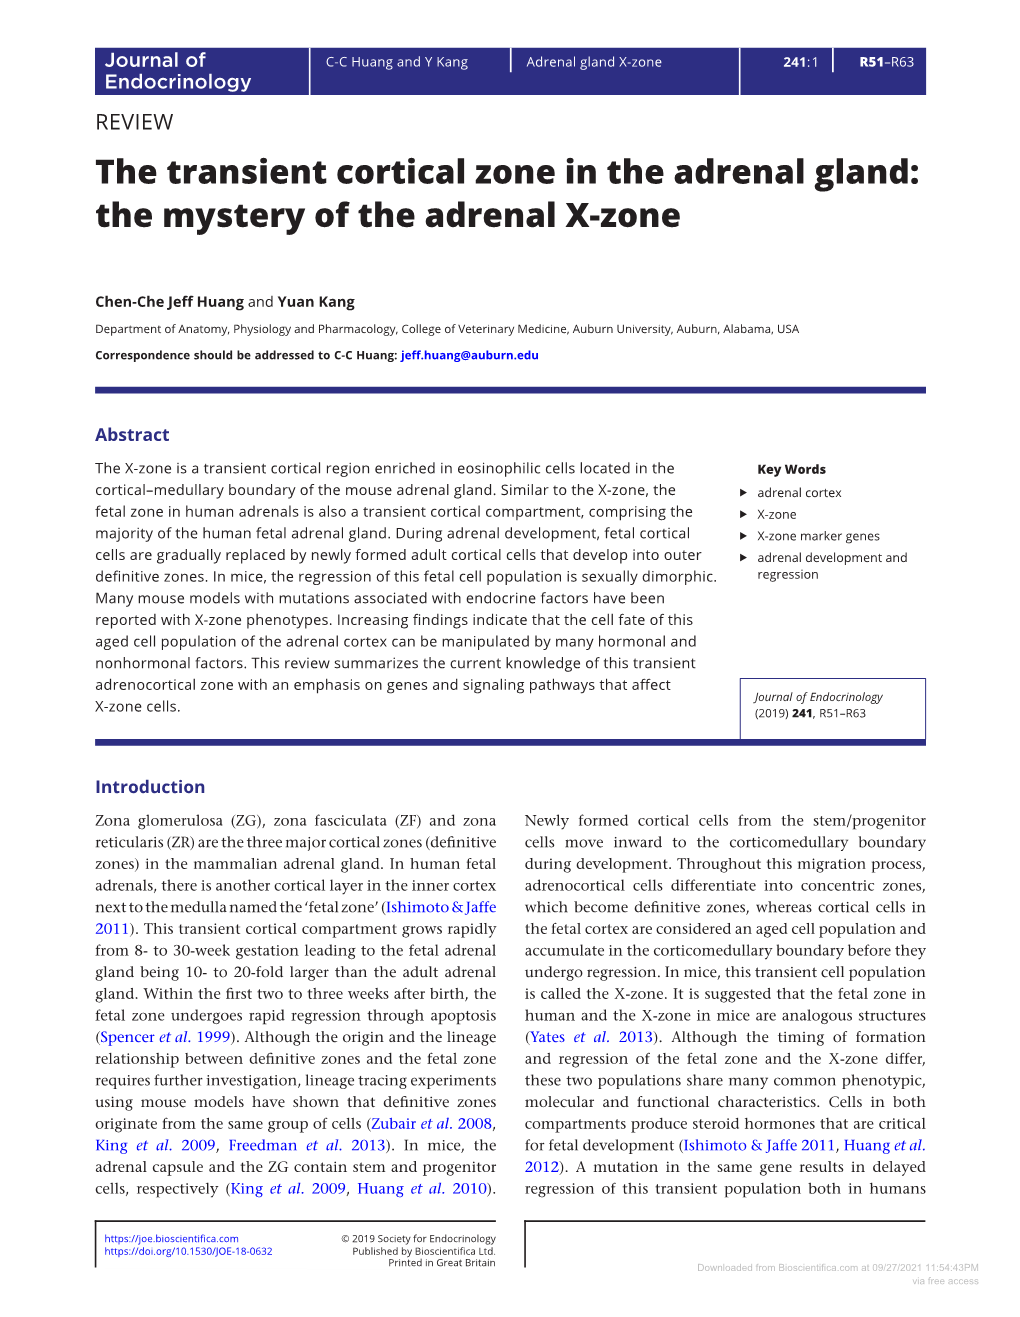 The Transient Cortical Zone in the Adrenal Gland: the Mystery of the Adrenal X-Zone